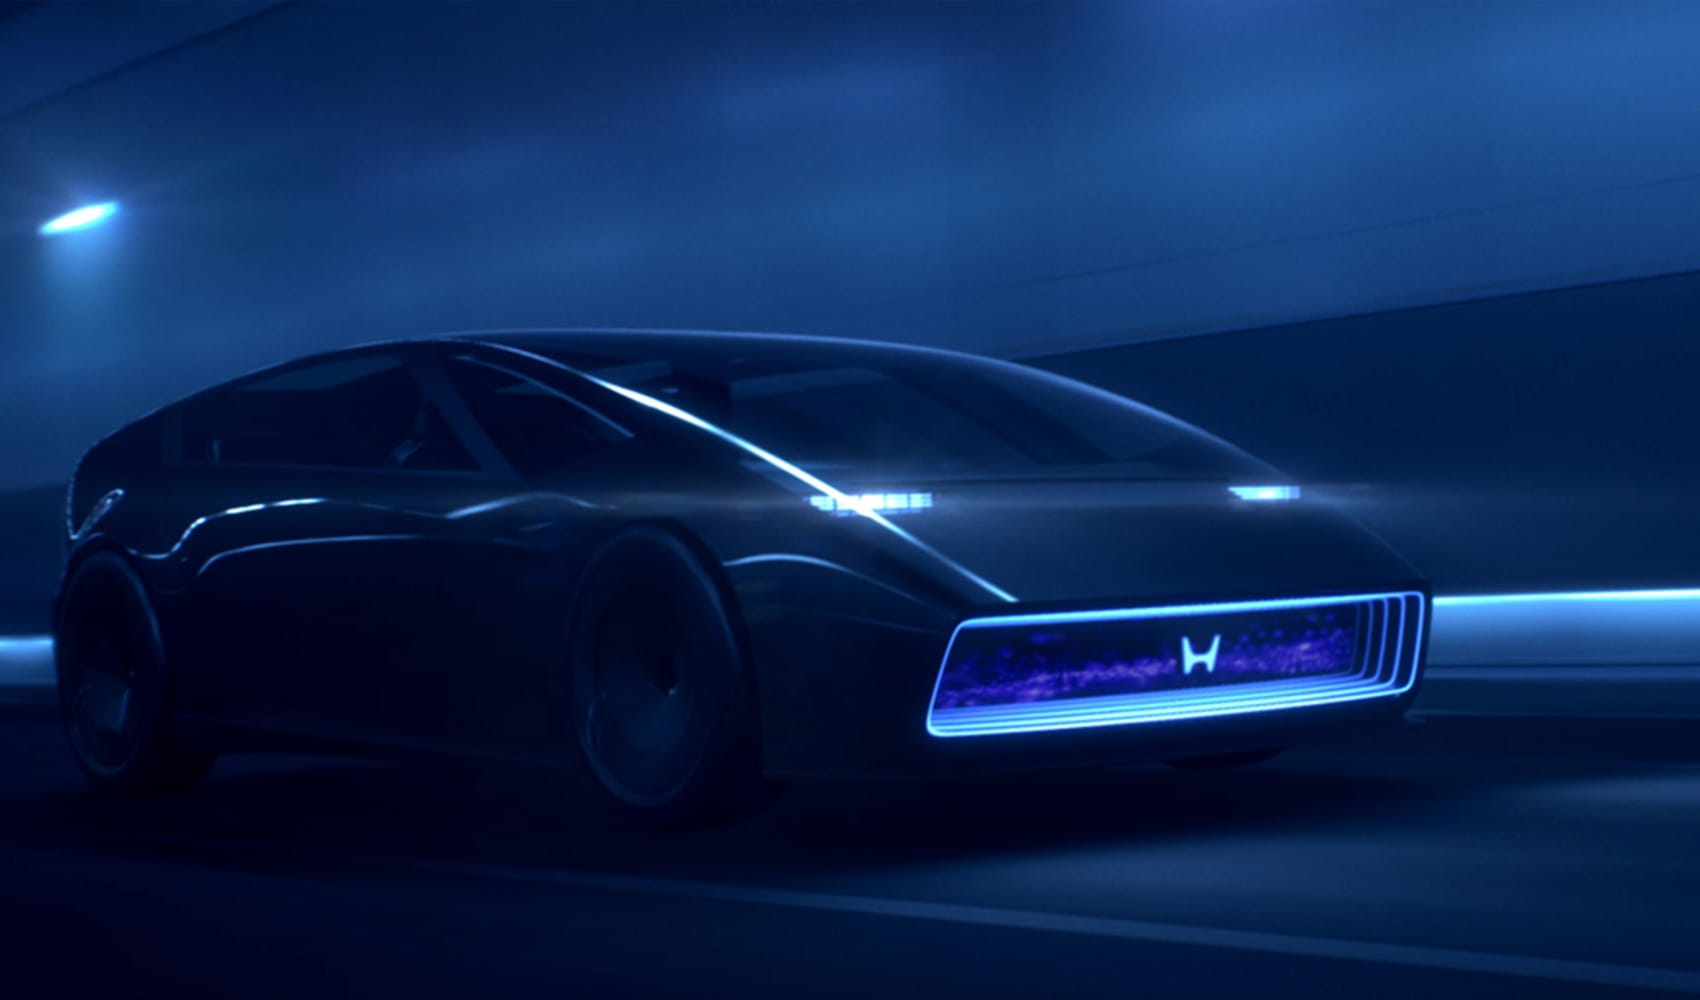 Honda teases new EVs with futuristic ‘Space-Hub' and ‘Saloon'
concept cars